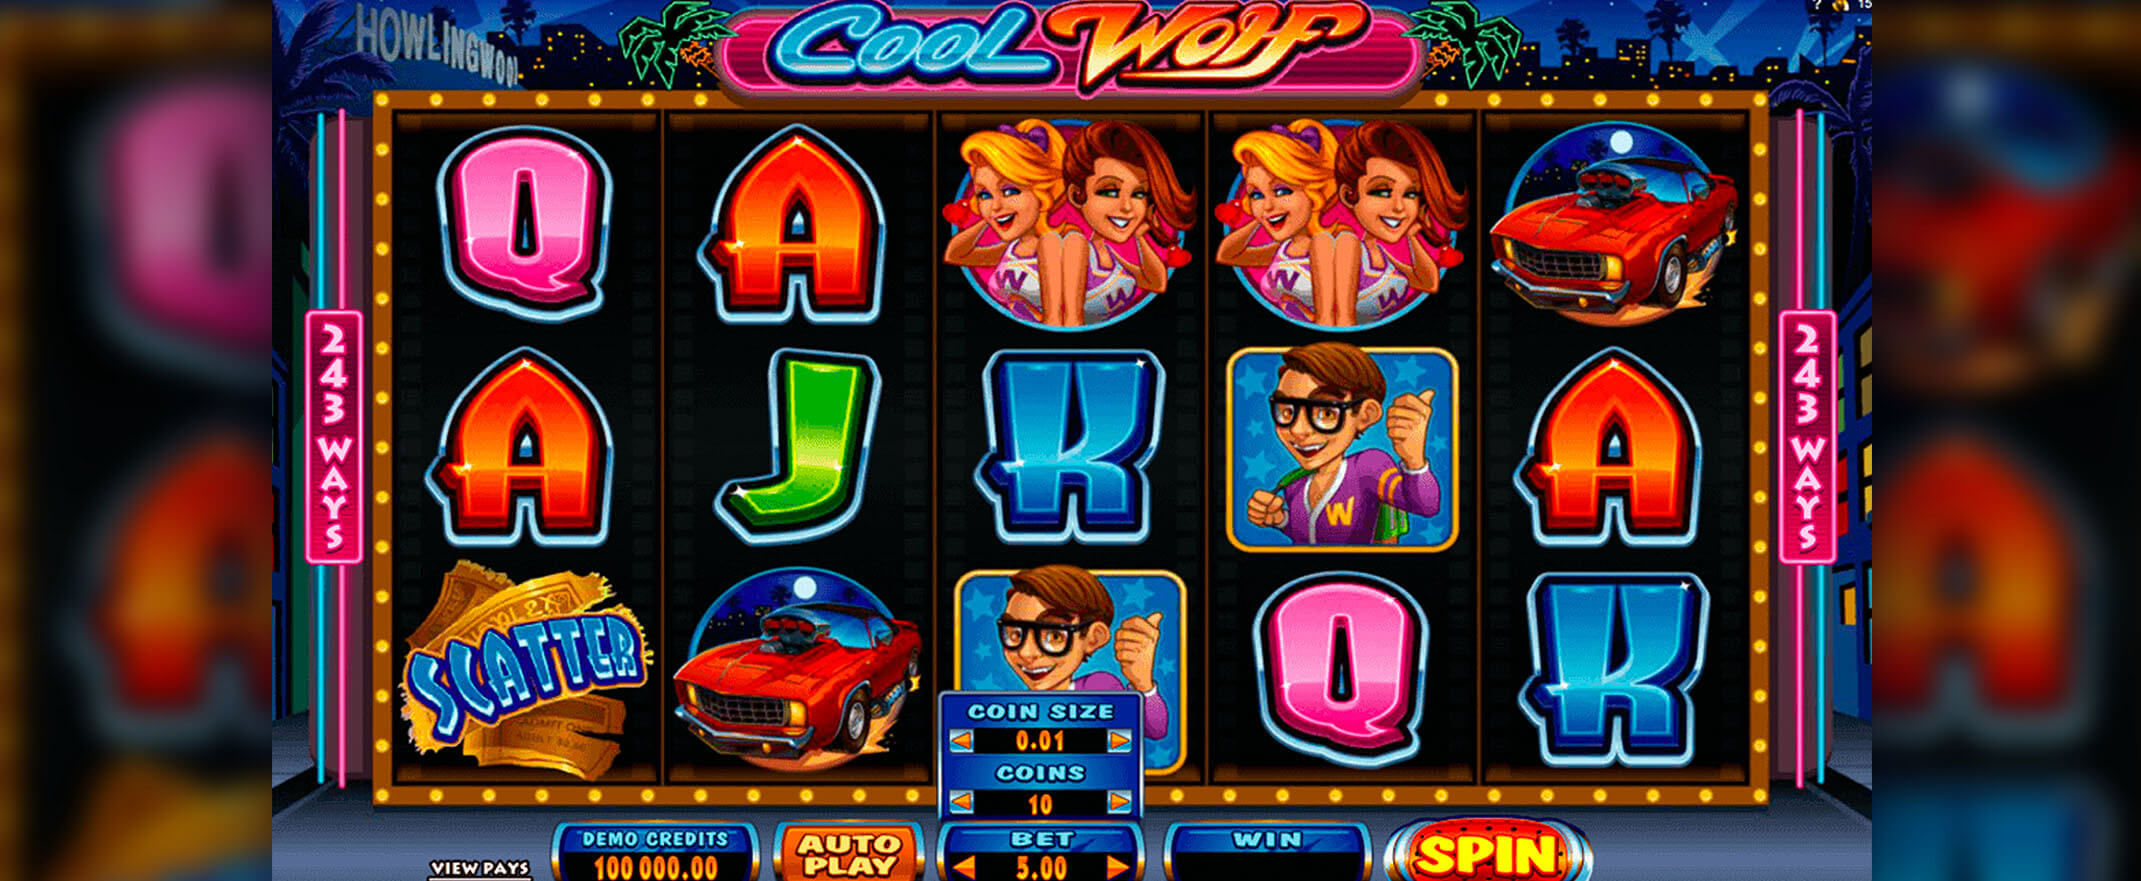 Cool Wolf video slot by Microgaming